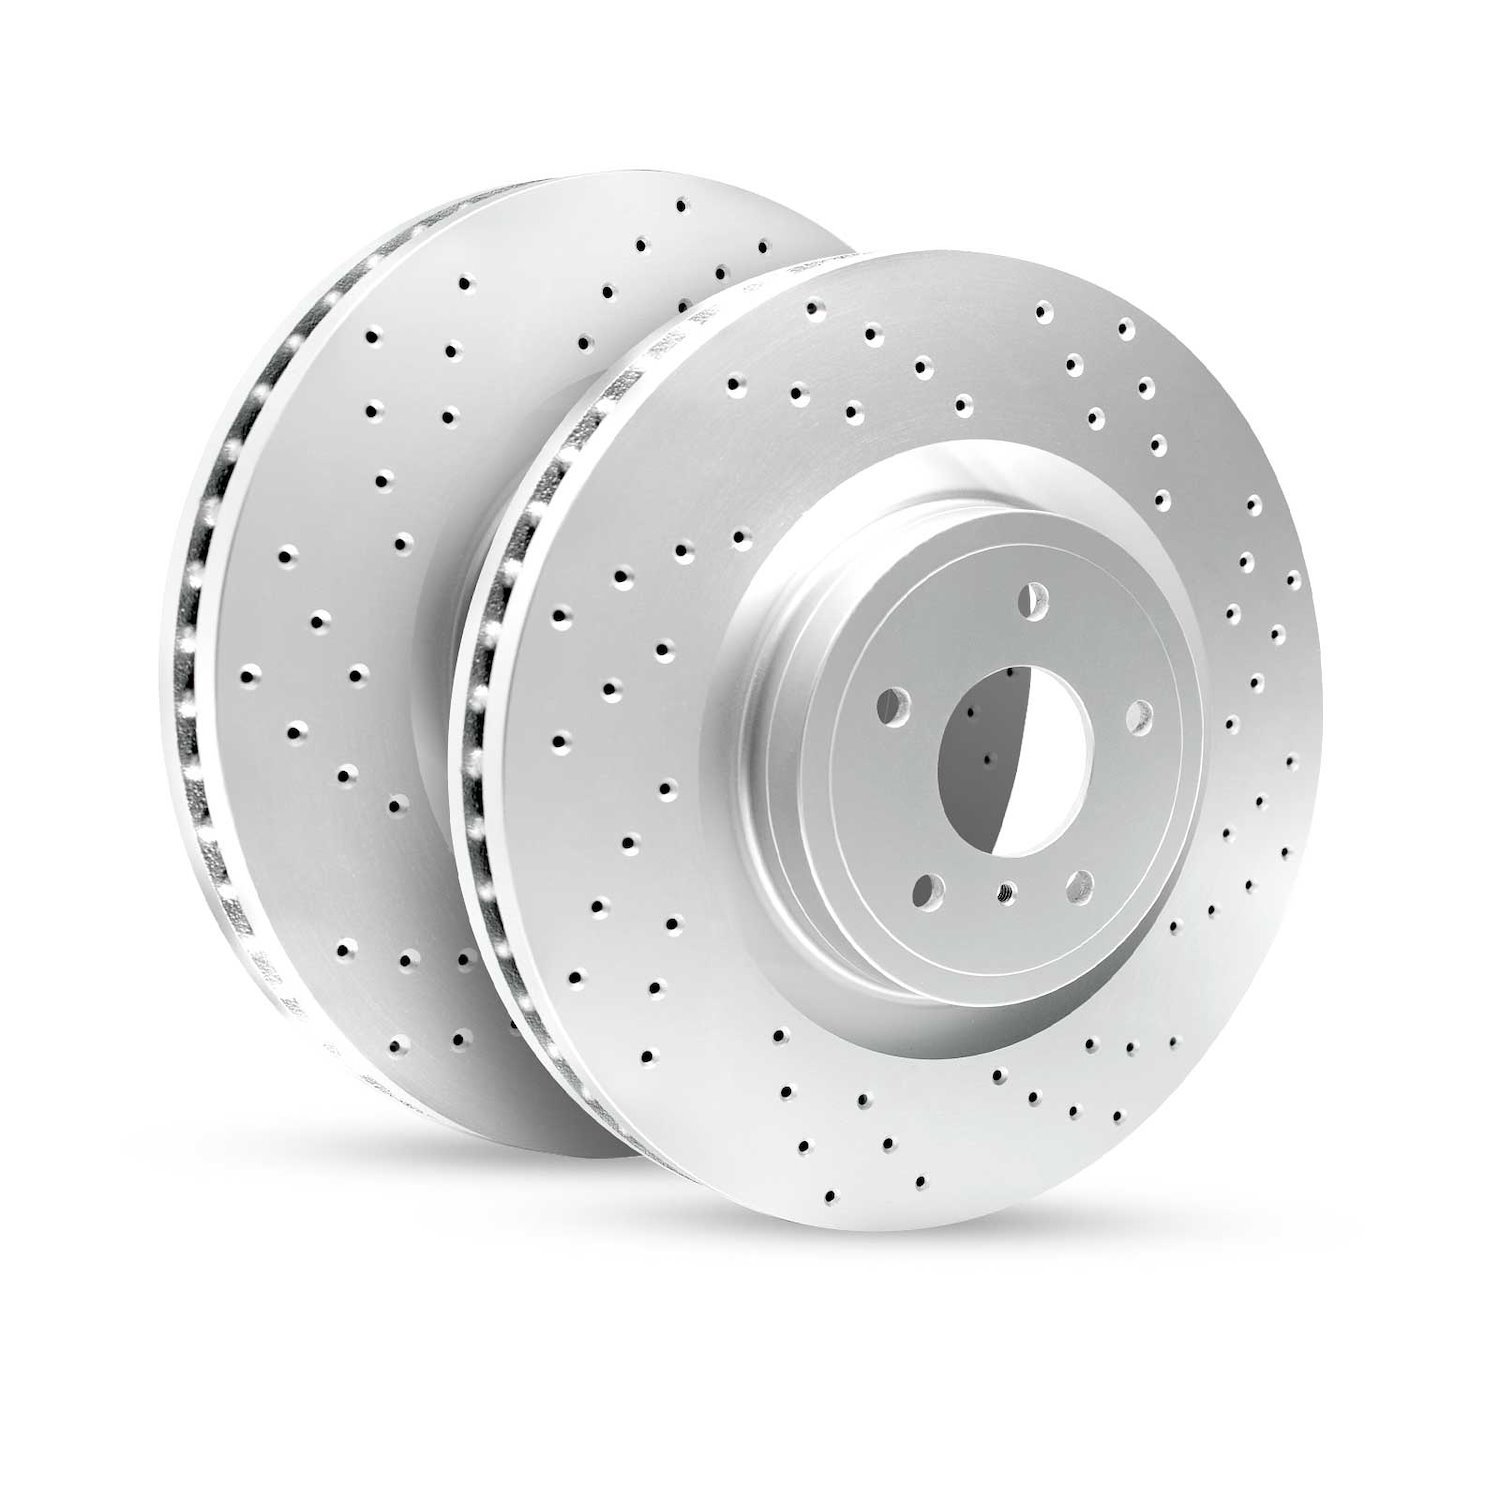 GEO-Carbon Drilled/Slotted Rotors, 2010-2018 BMW, Position: Front